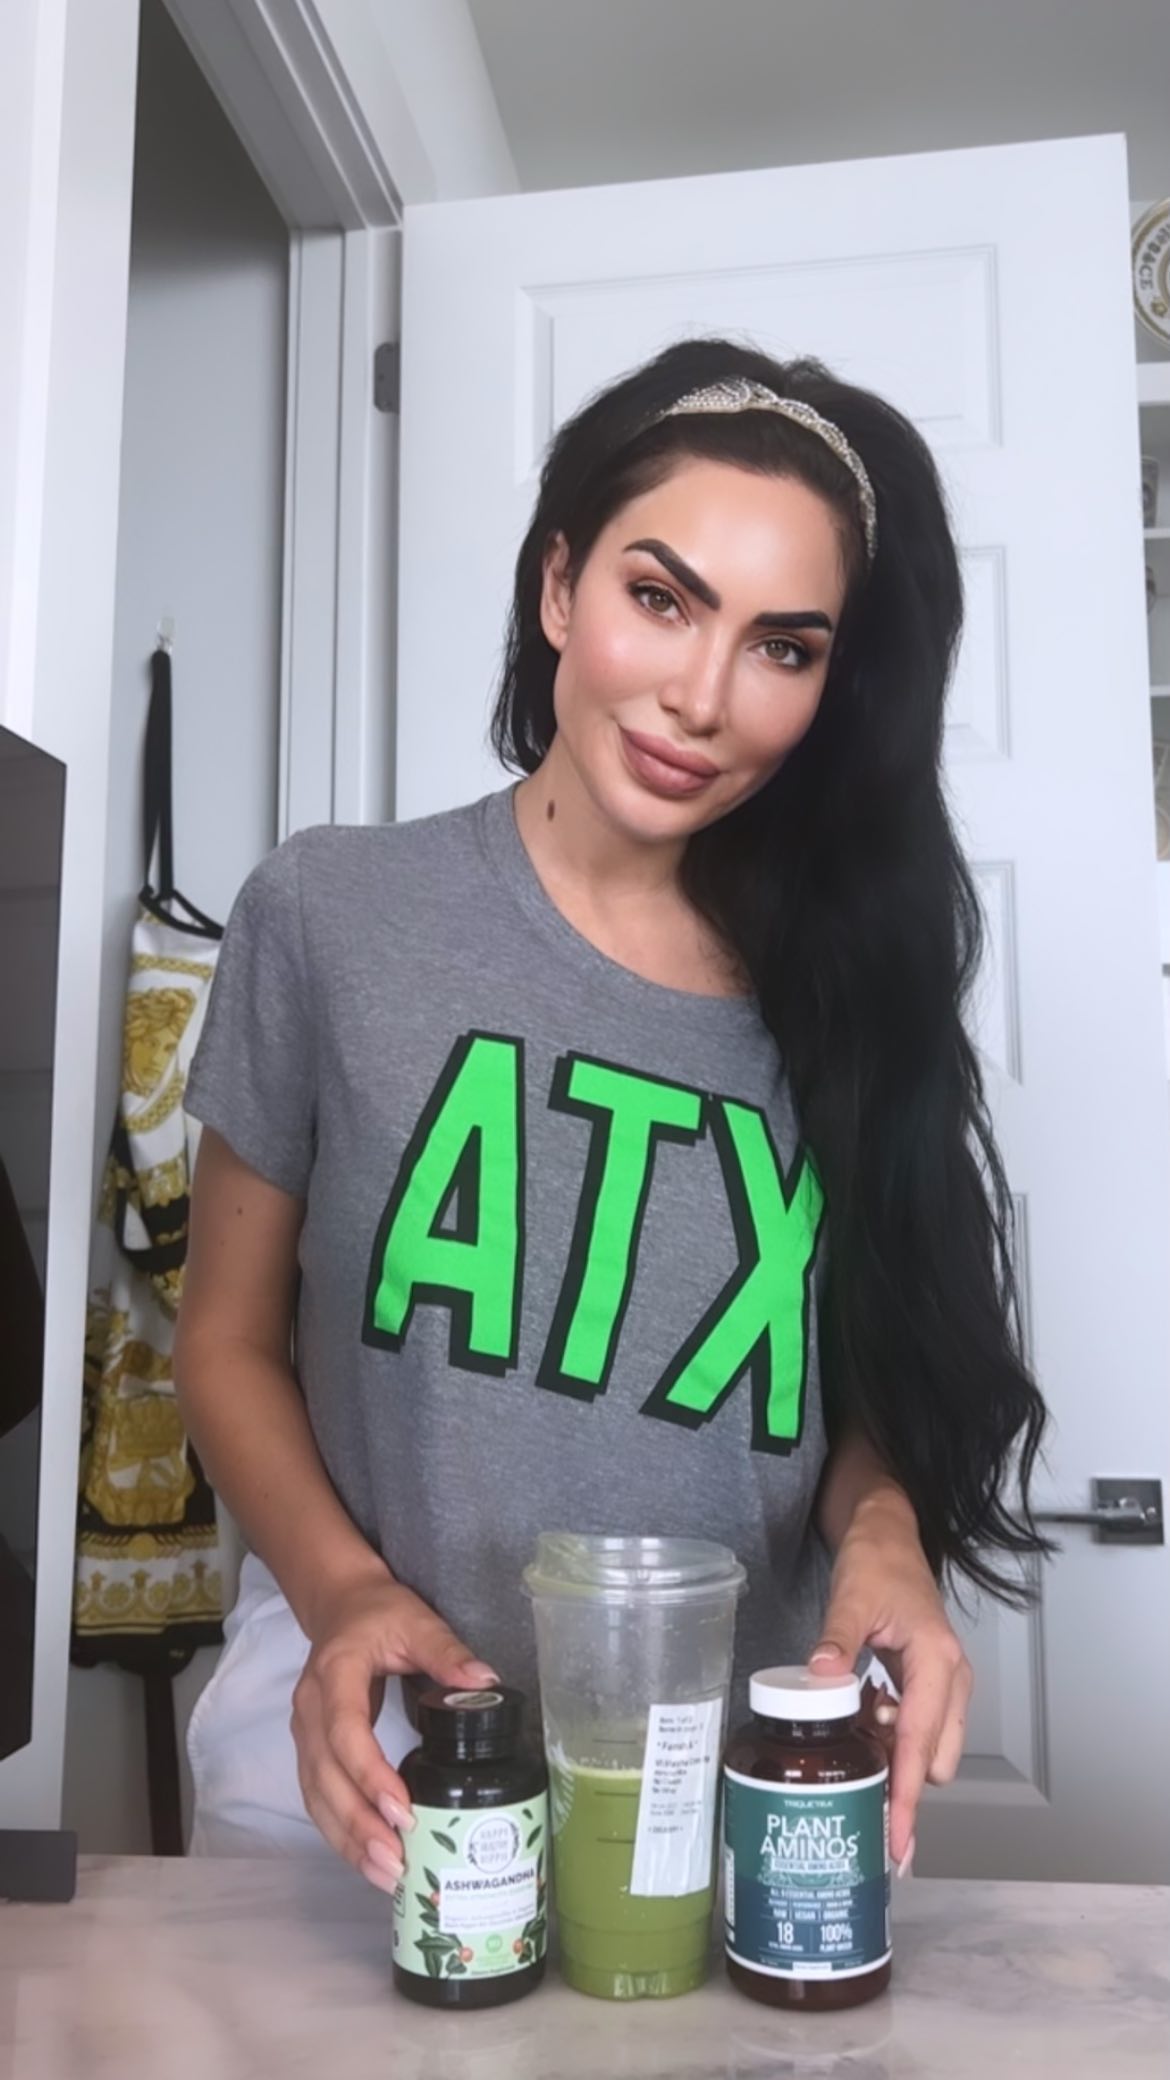 Farrah showed off her dark eyebrows while posing in the kitchen in a previous post